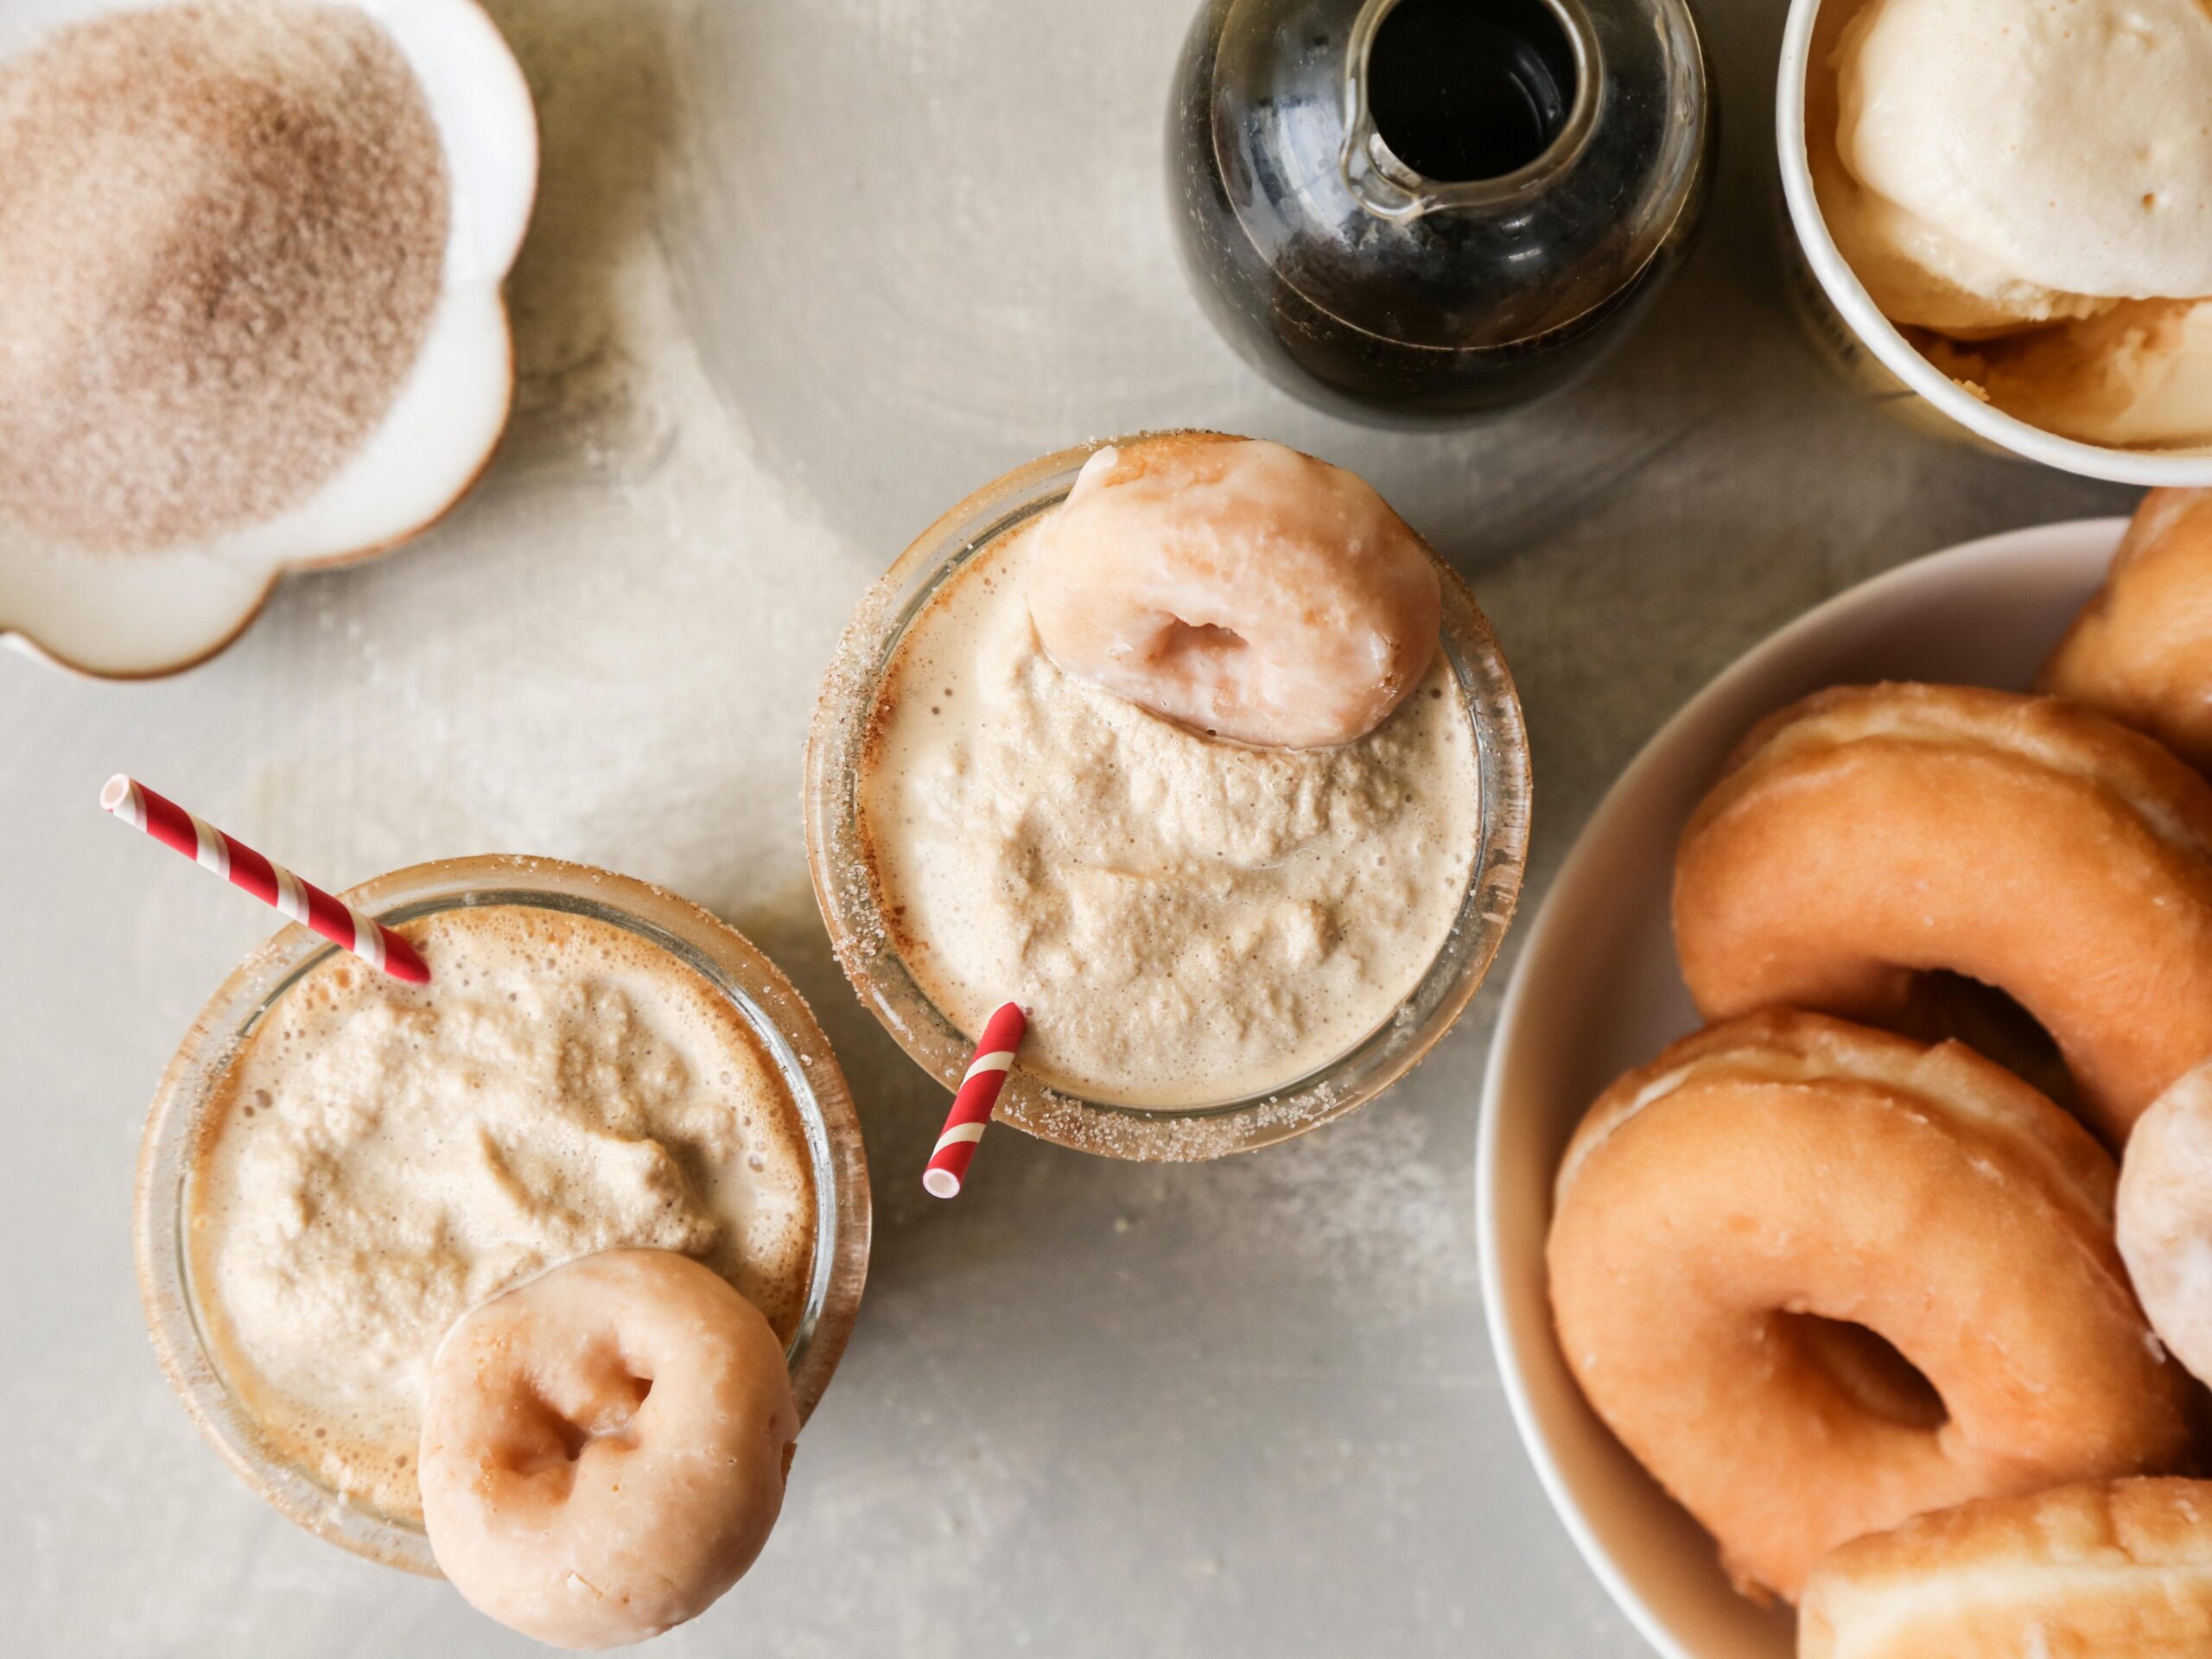  This unique combination of coffee and donuts is sure to satisfy your cravings.